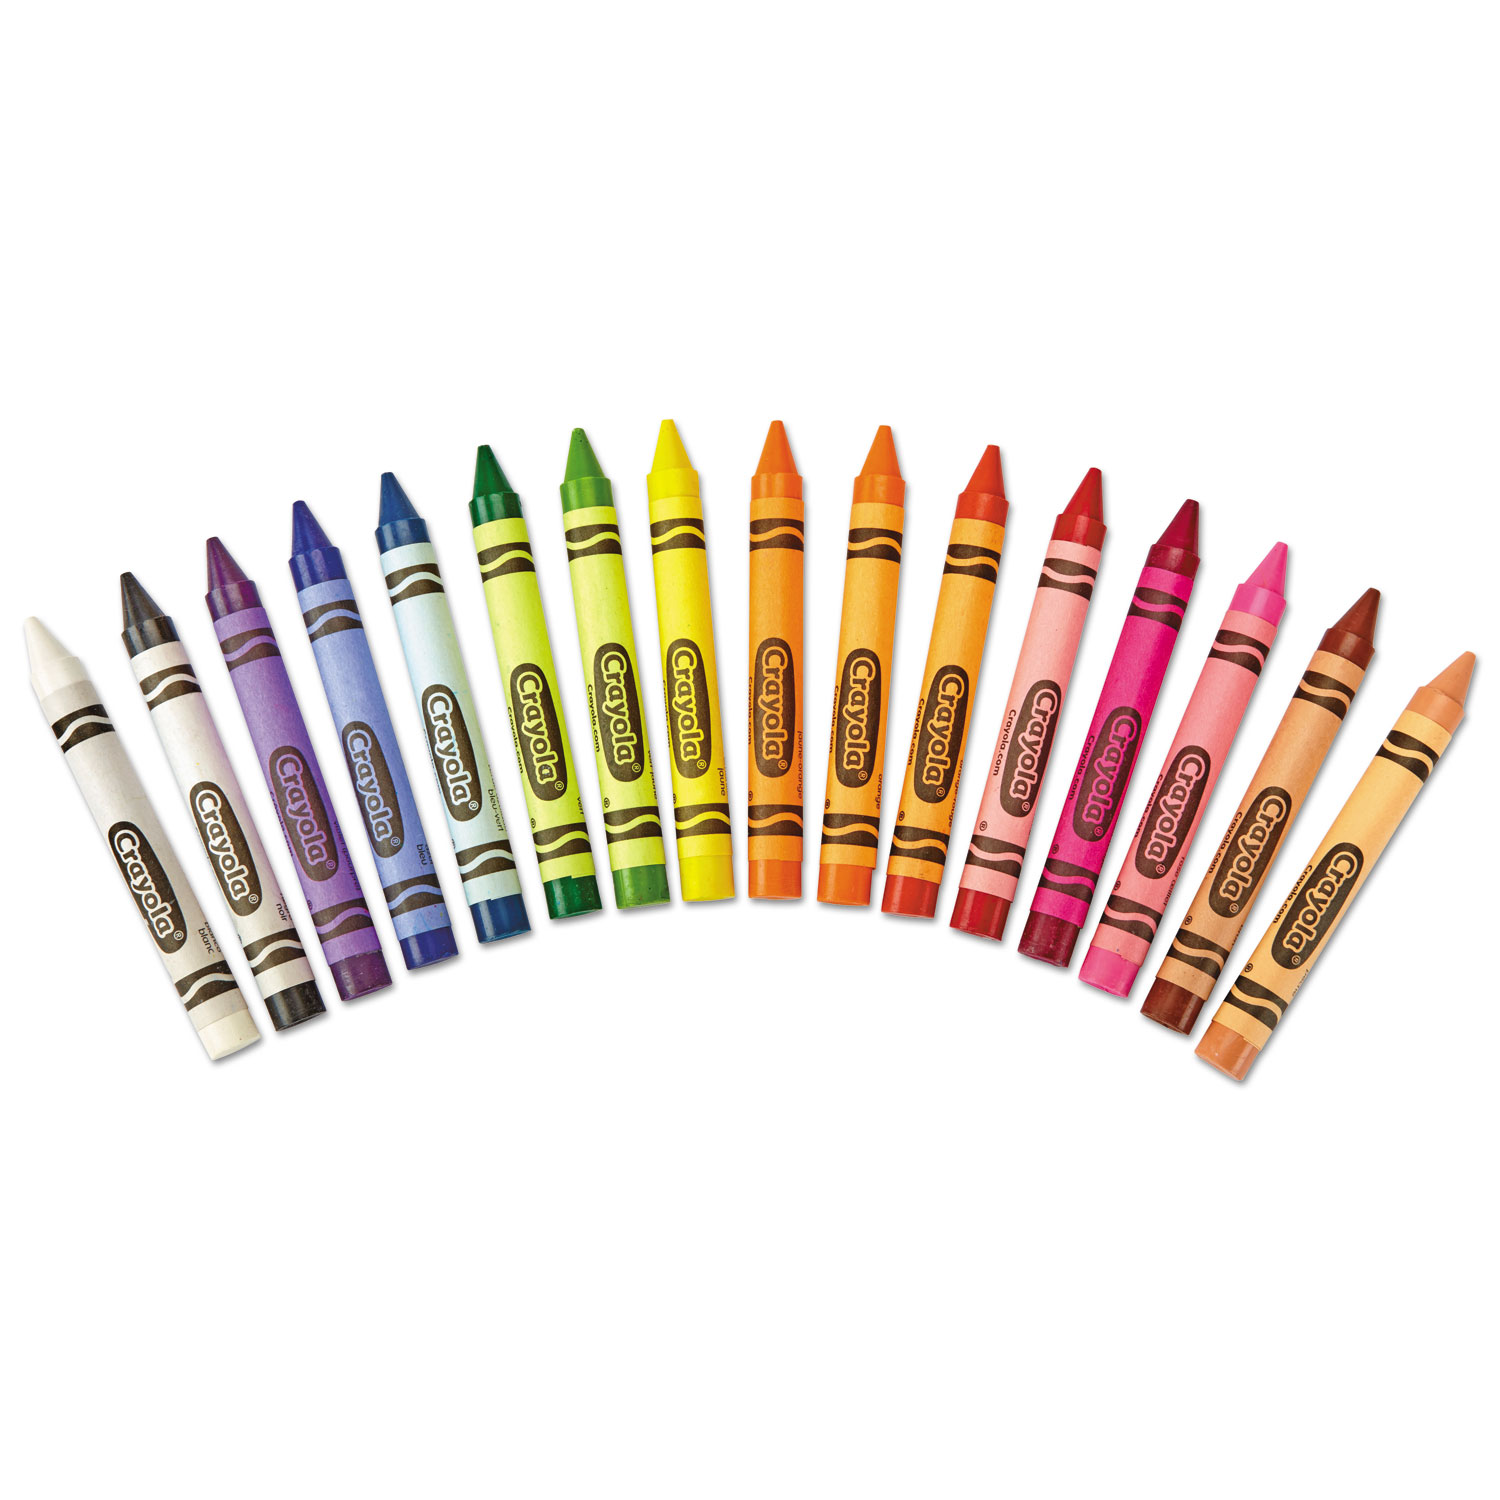 Crayola Cello Crayons Assorted Colors 4 Crayons Per Pack Carton Of 360  Packs - Office Depot